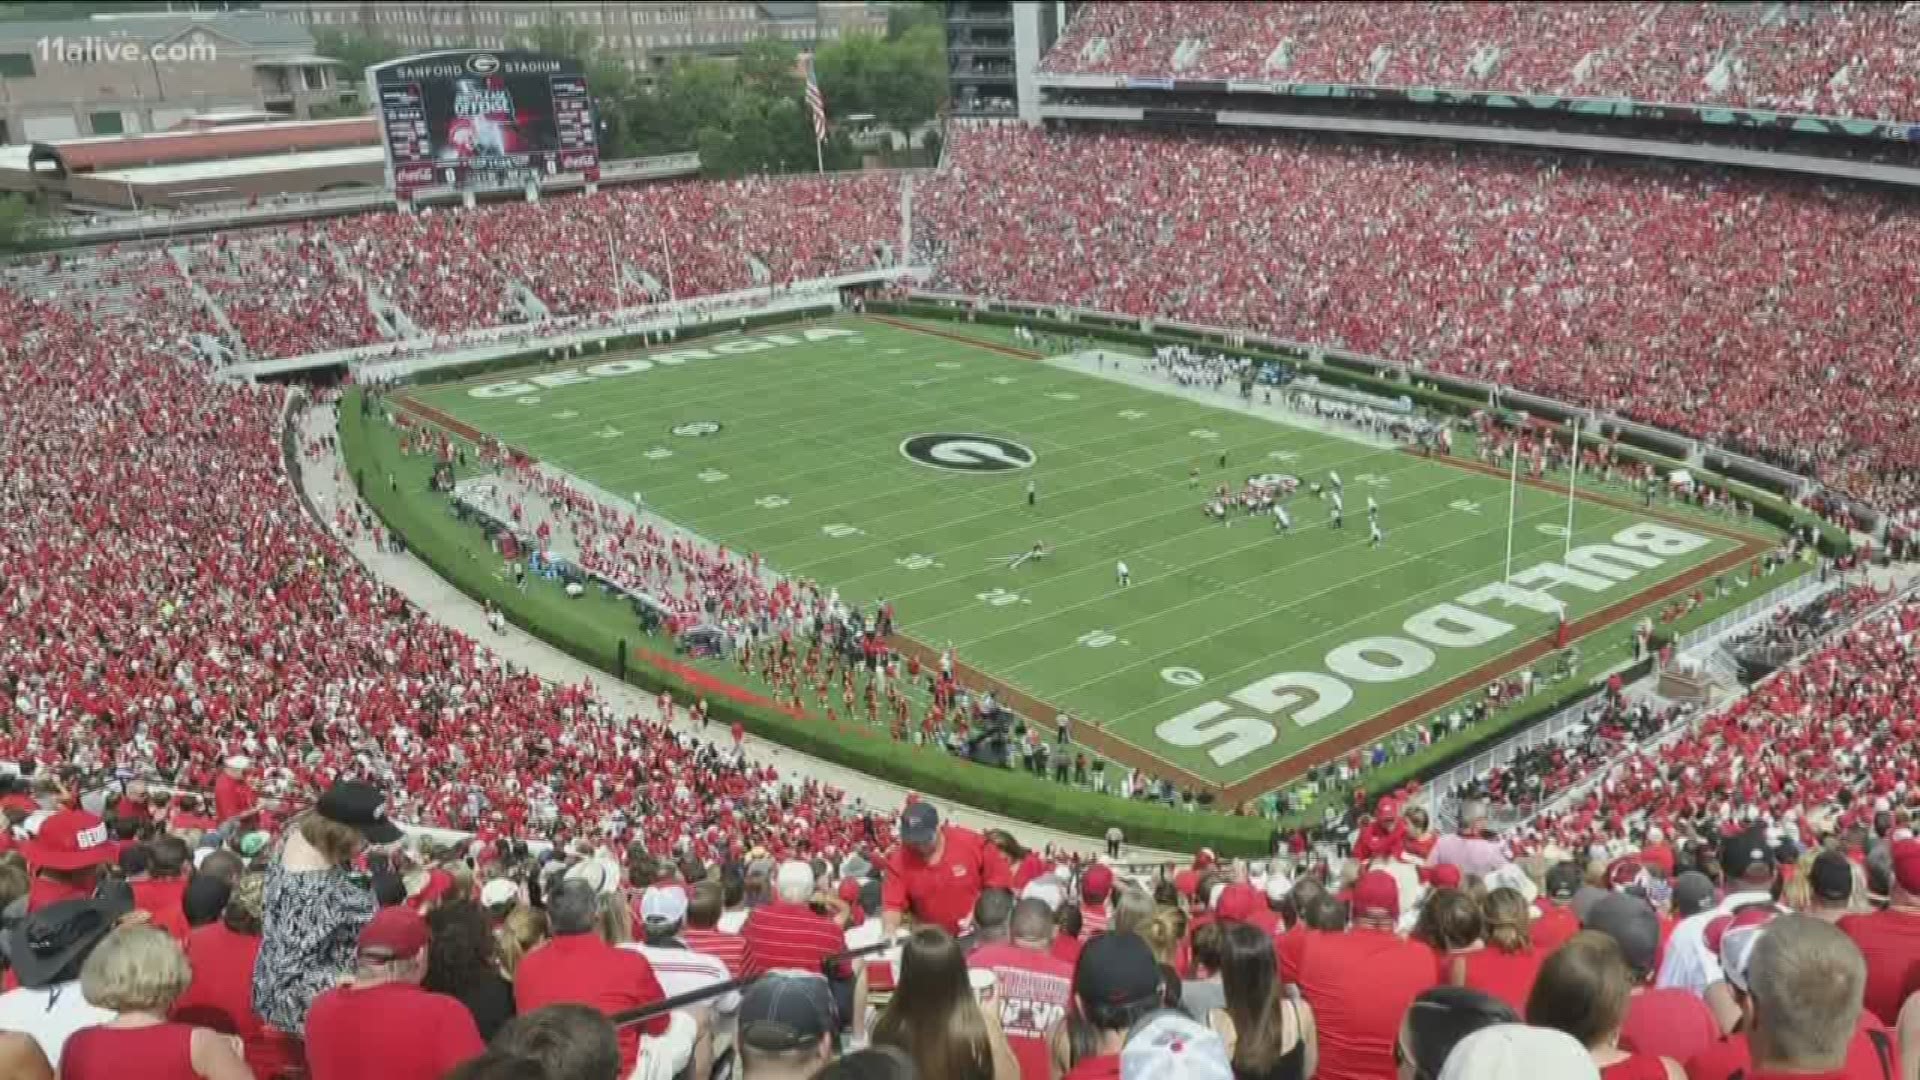 It’s the most sought after and perhaps expensive ticket in college football. But UGA officials want you to beware of counterfeiters.